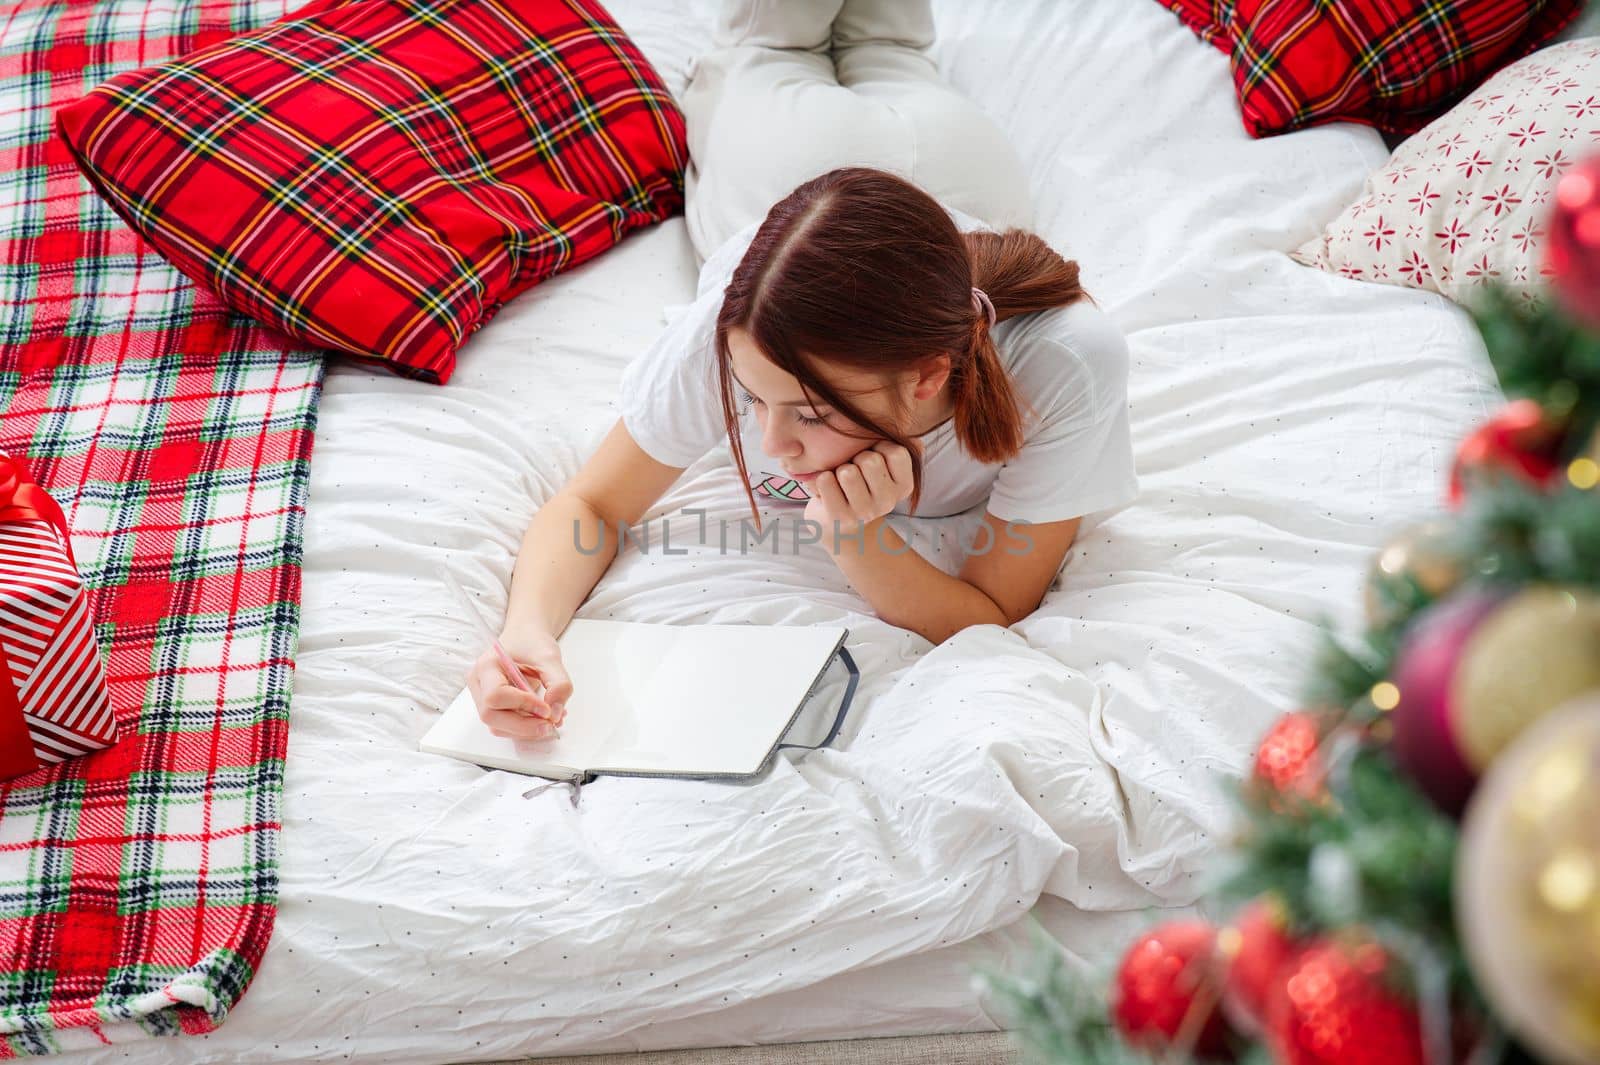 happy teenage girl with pen and notebook making wish list or to do list for new year in bed over christmas tree. teenage girl dreaming in christmas time. xmas holidays concept